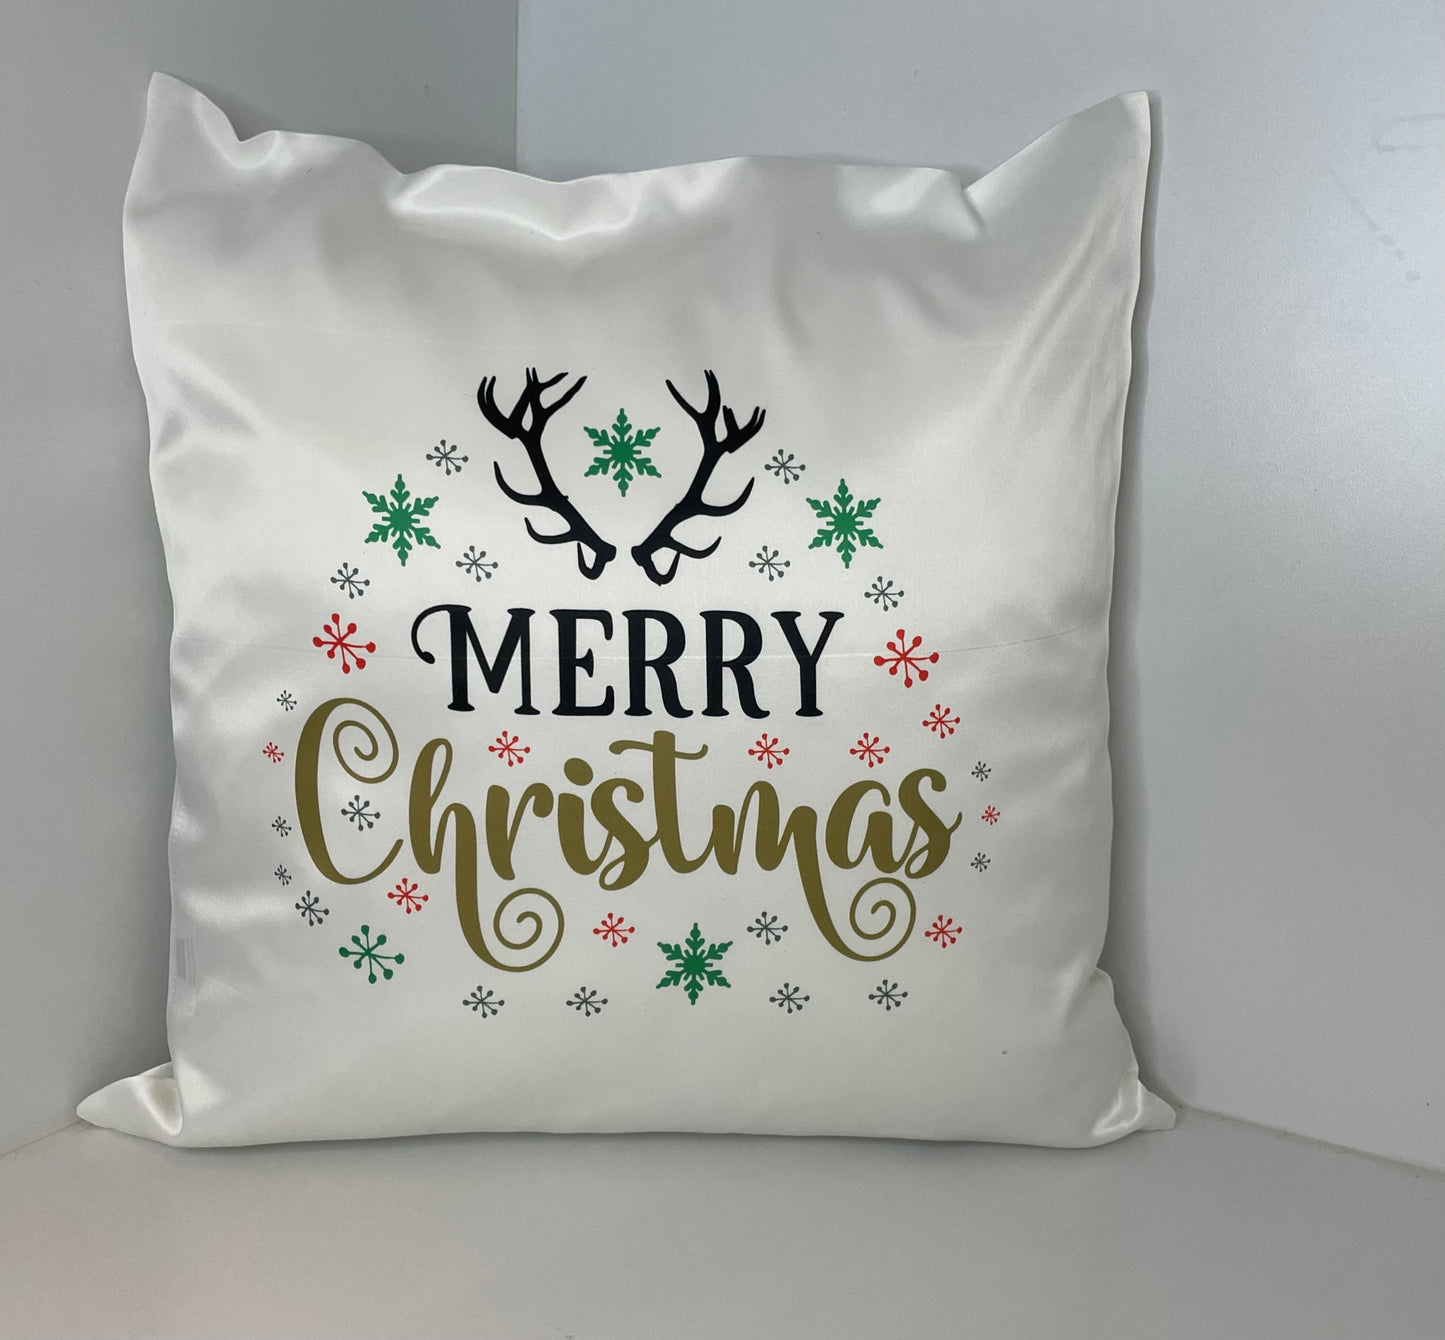 Personalized Christmas Pillows | Customize it your way